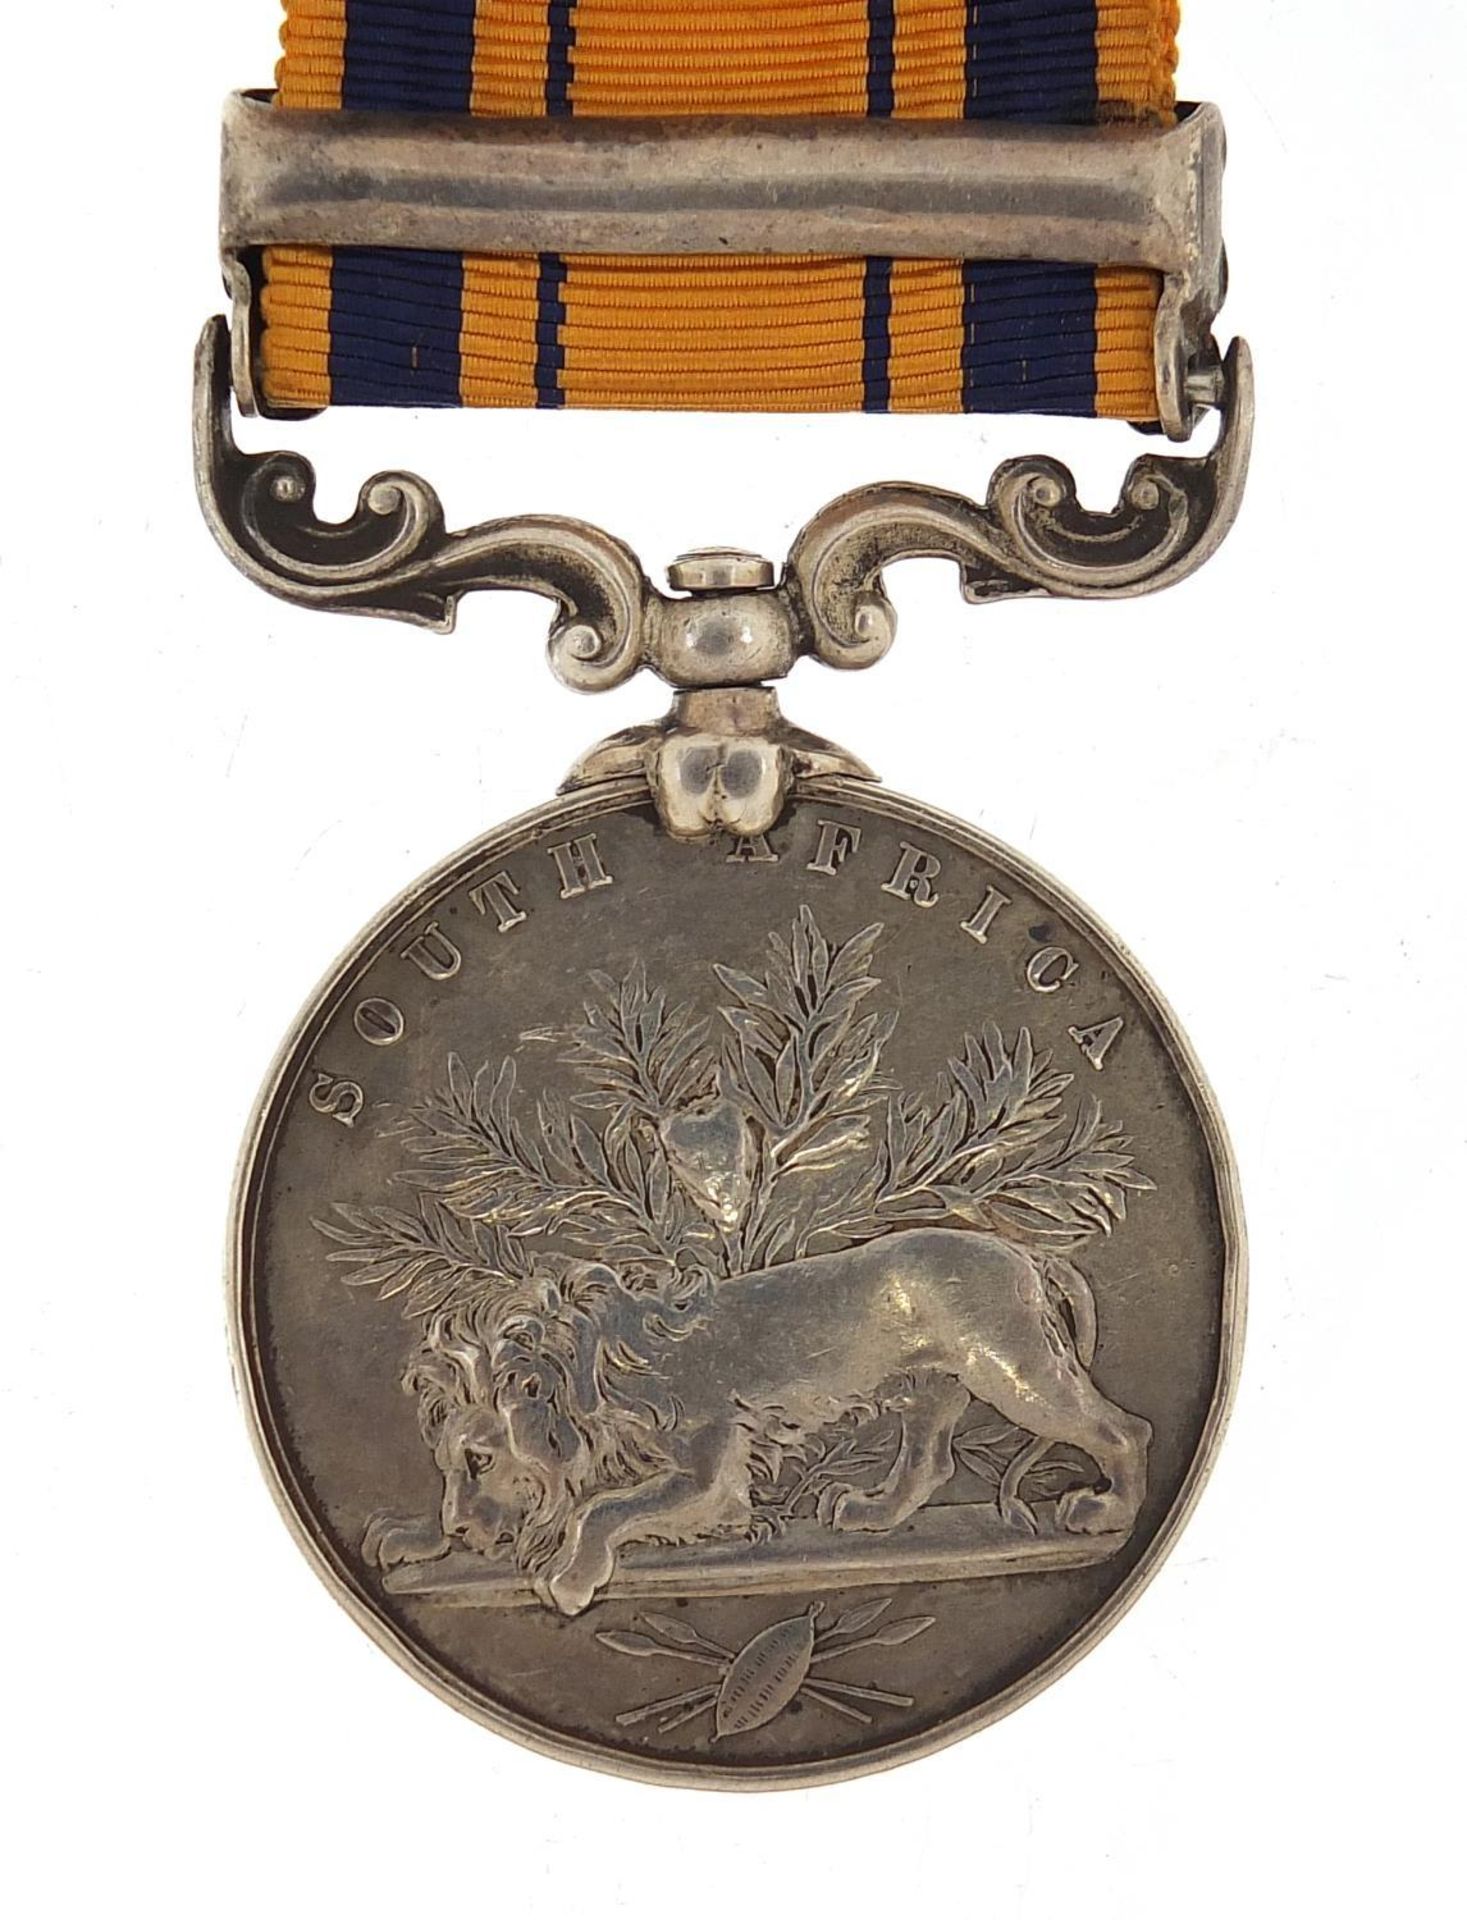 Victorian British military South Africa medal with 1879 bar awarded to 2313.PTE.J.DALE.2/4TH.FOOT - Image 4 of 4